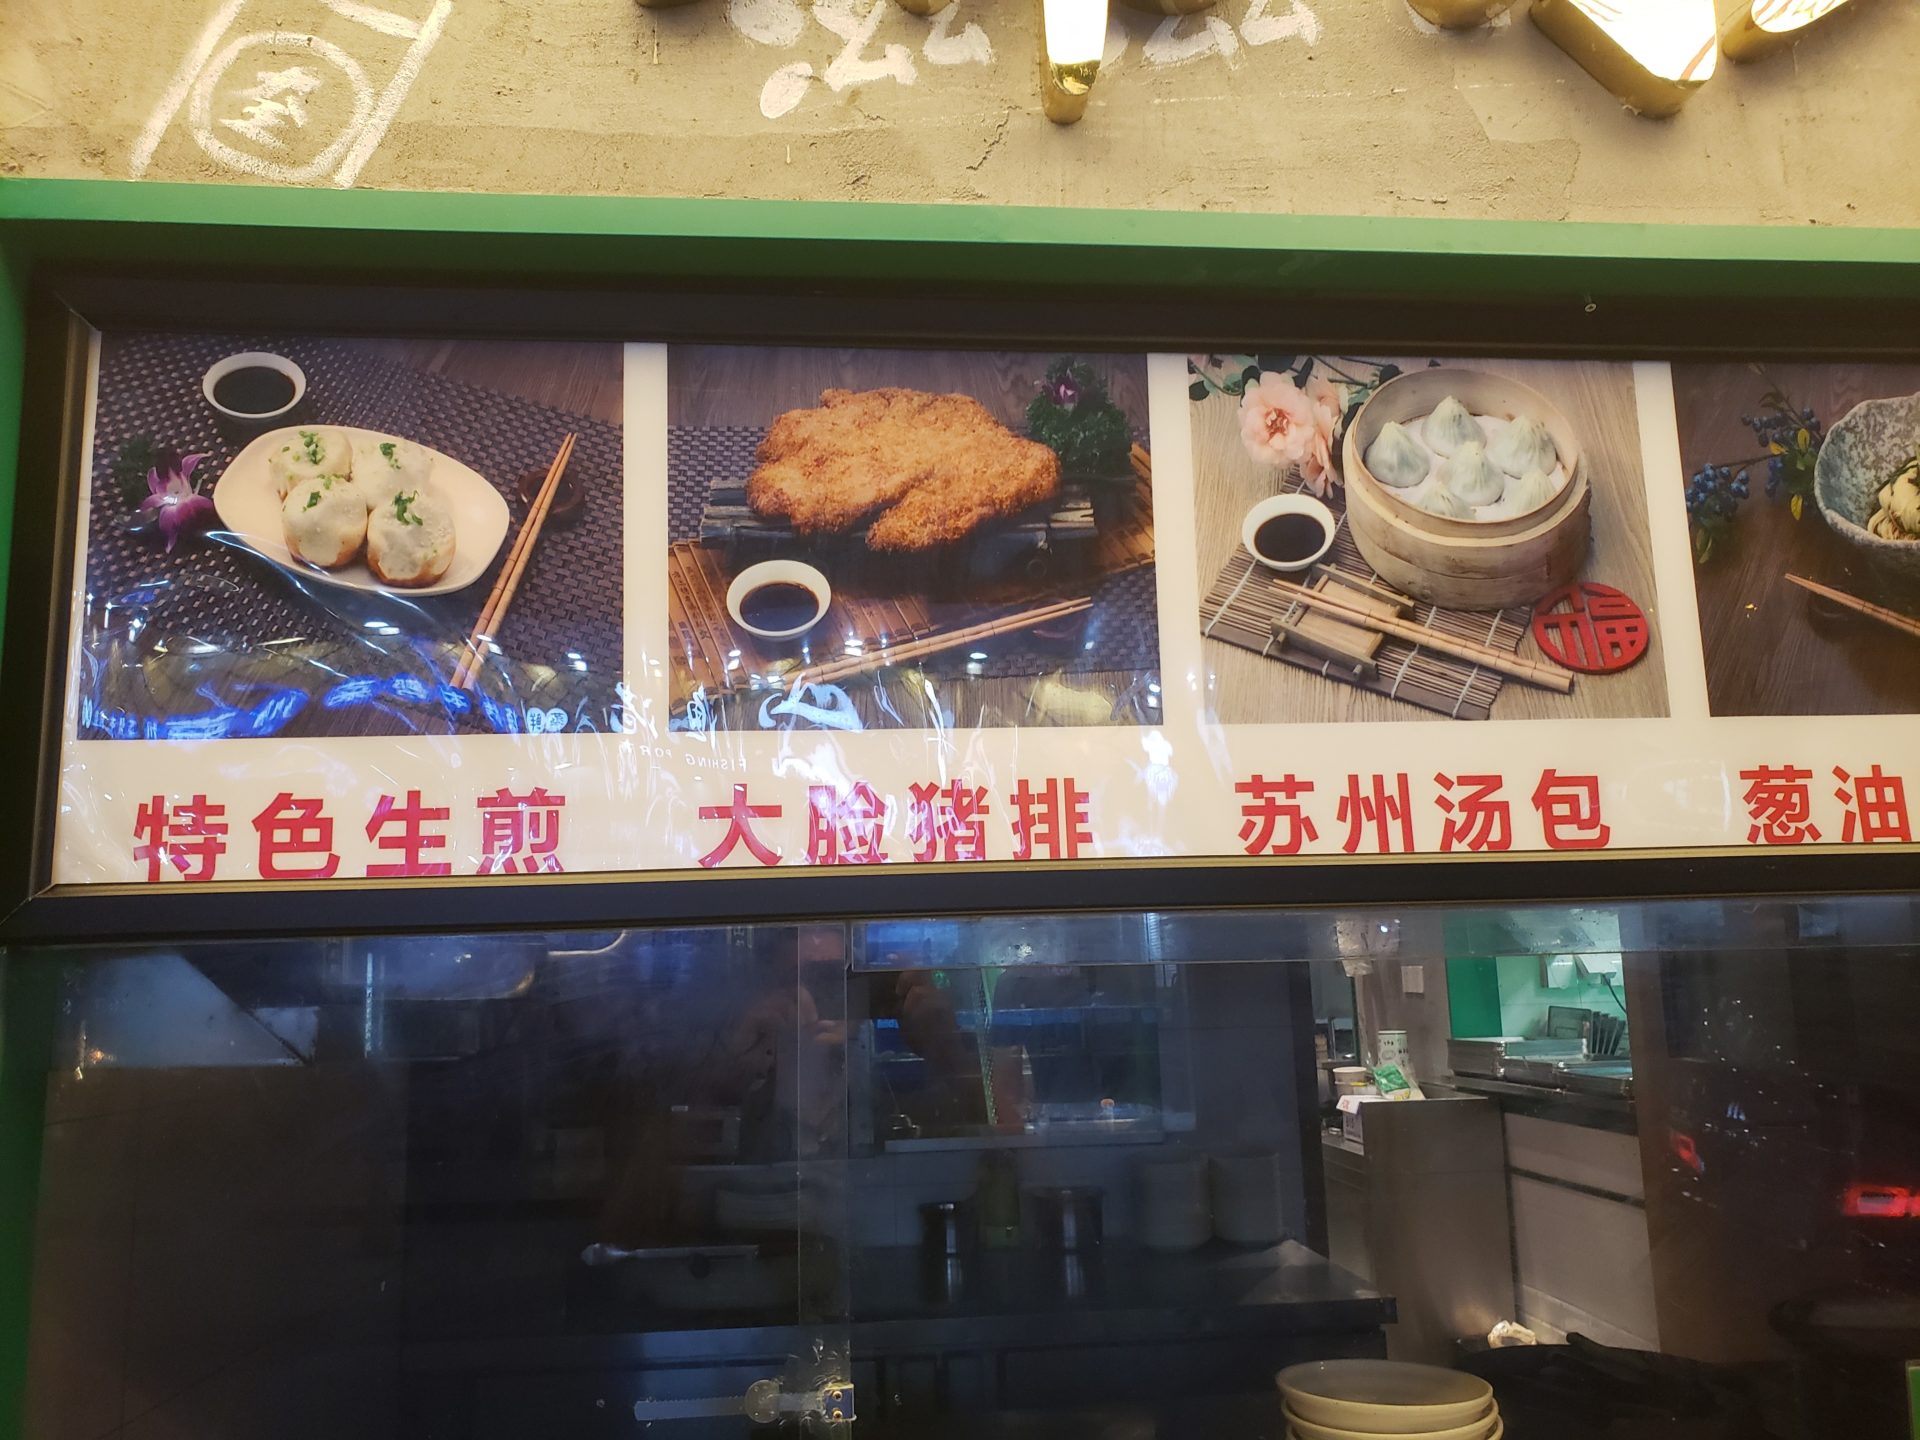 a sign with pictures of food on it